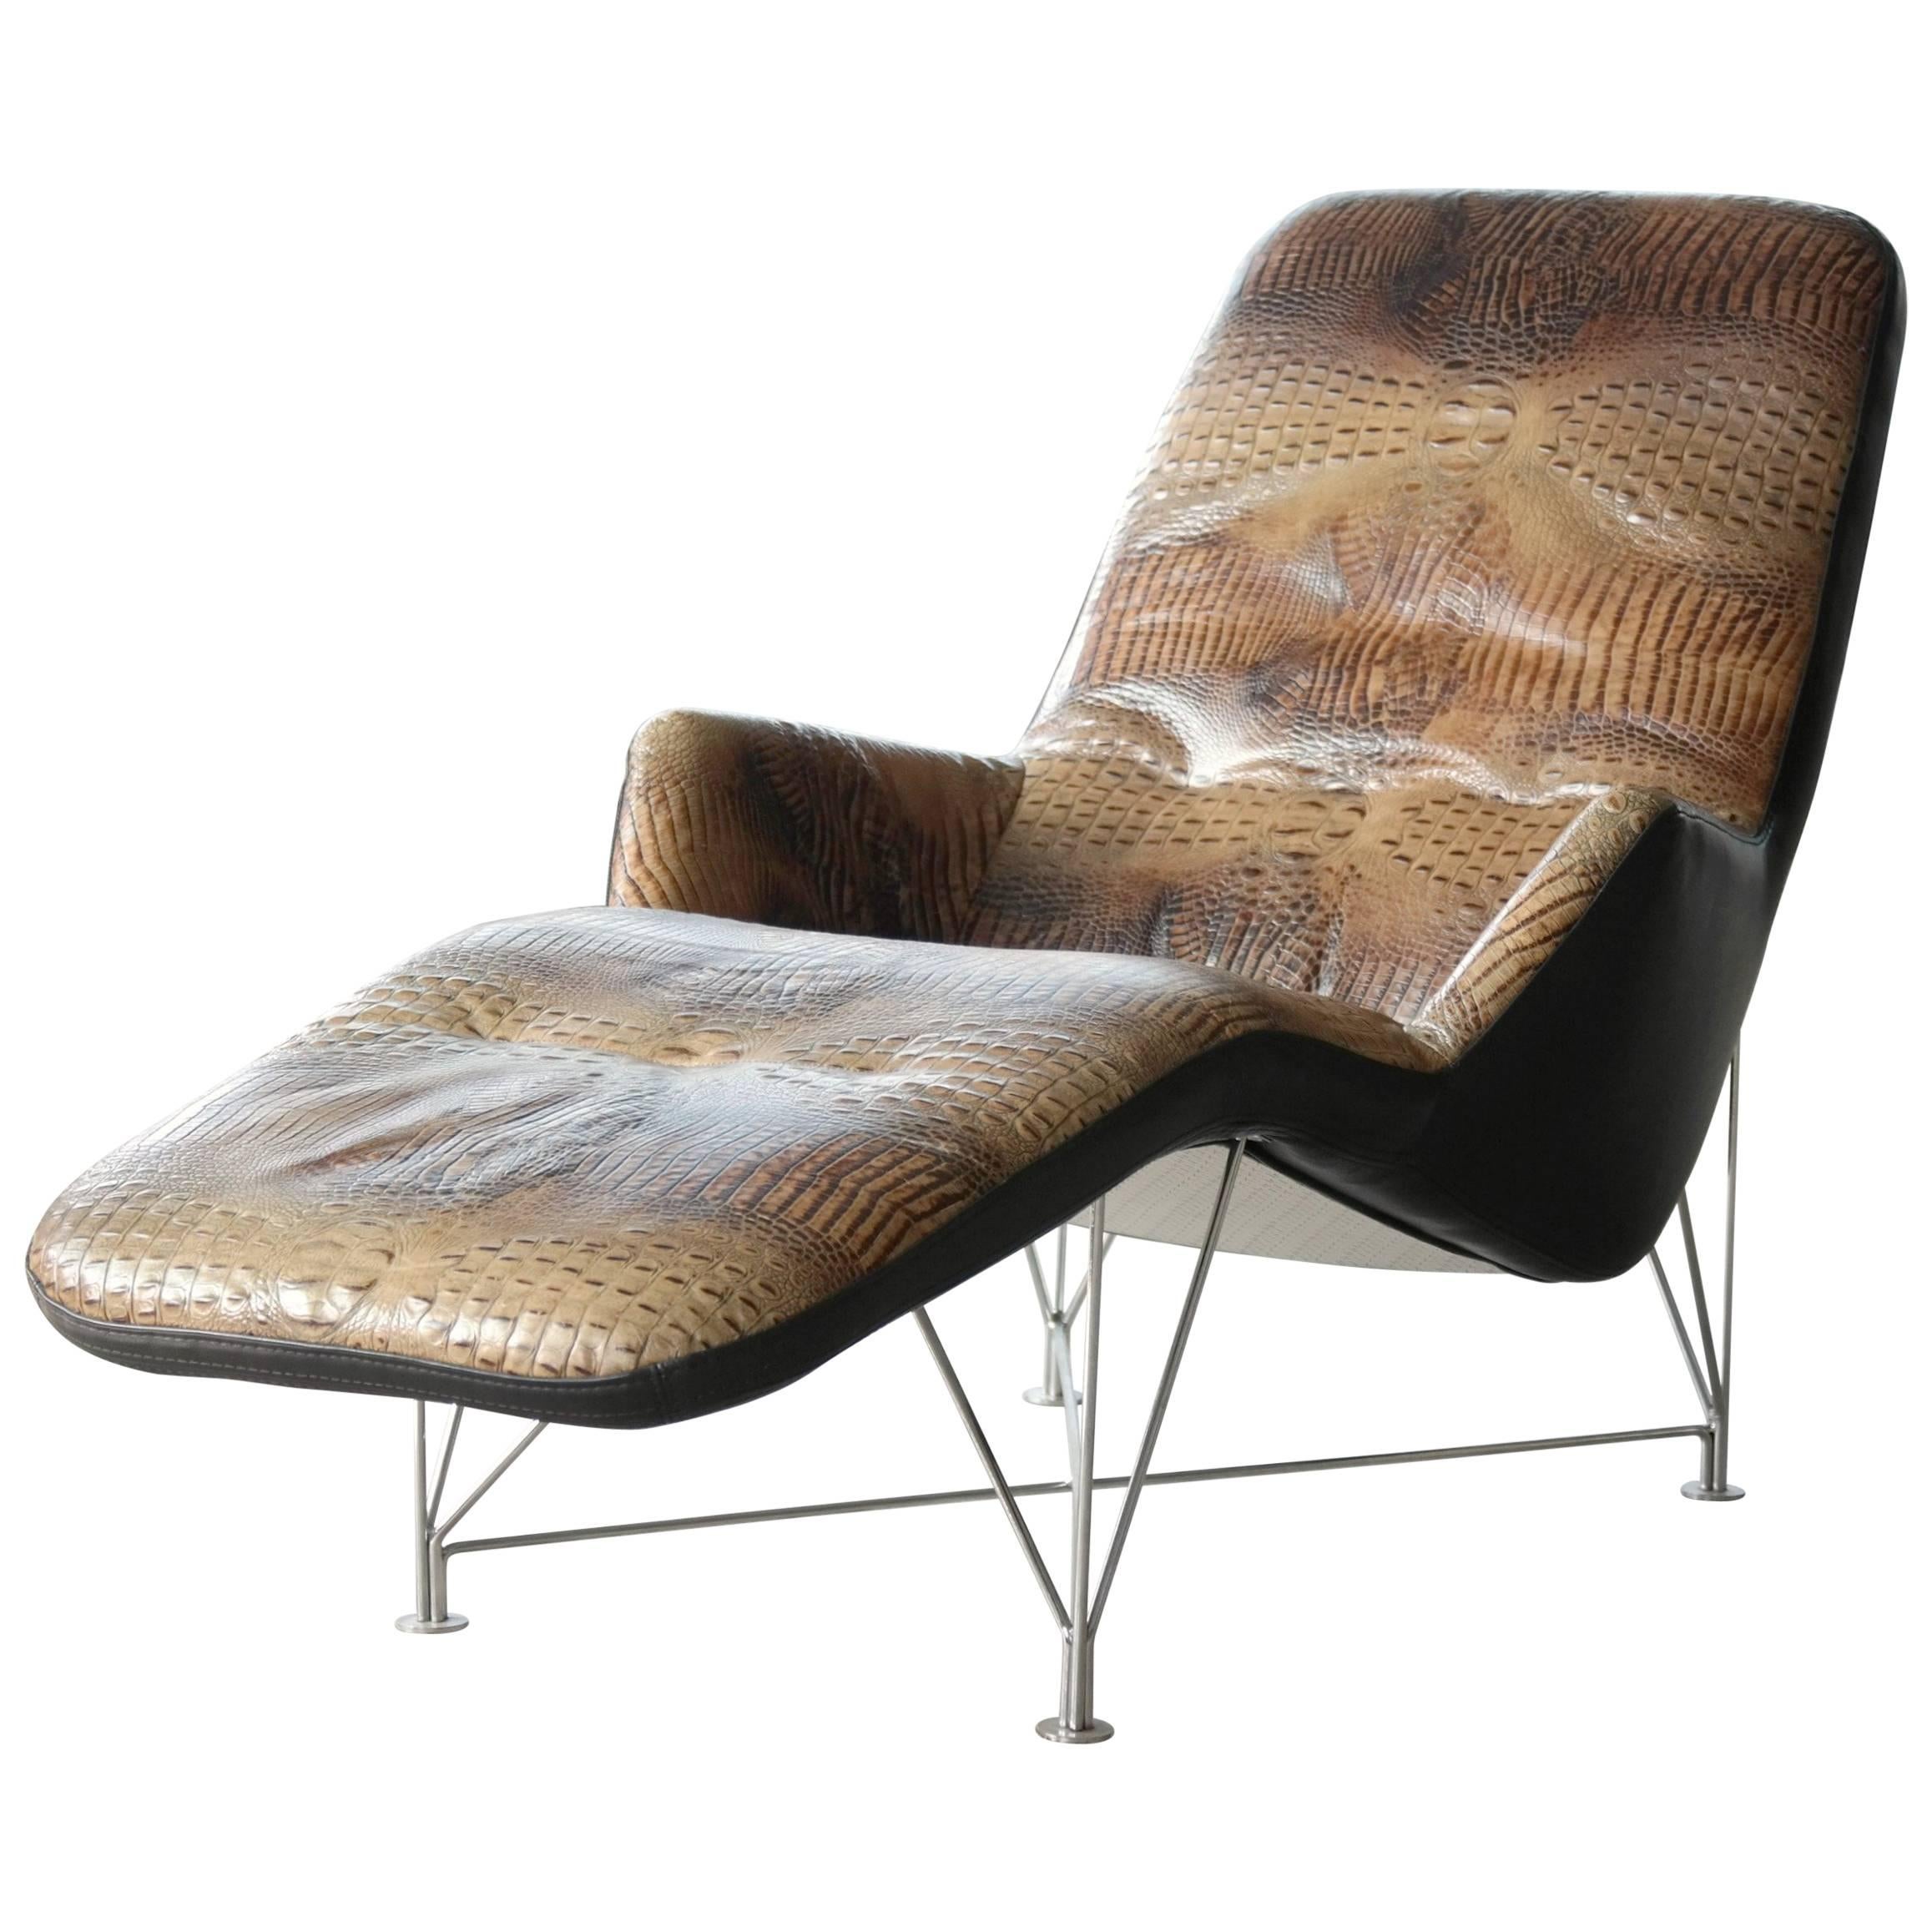 Kenneth Bergenblad Superspider Chaise Longue in Crocodile Leather for Dux Sweden